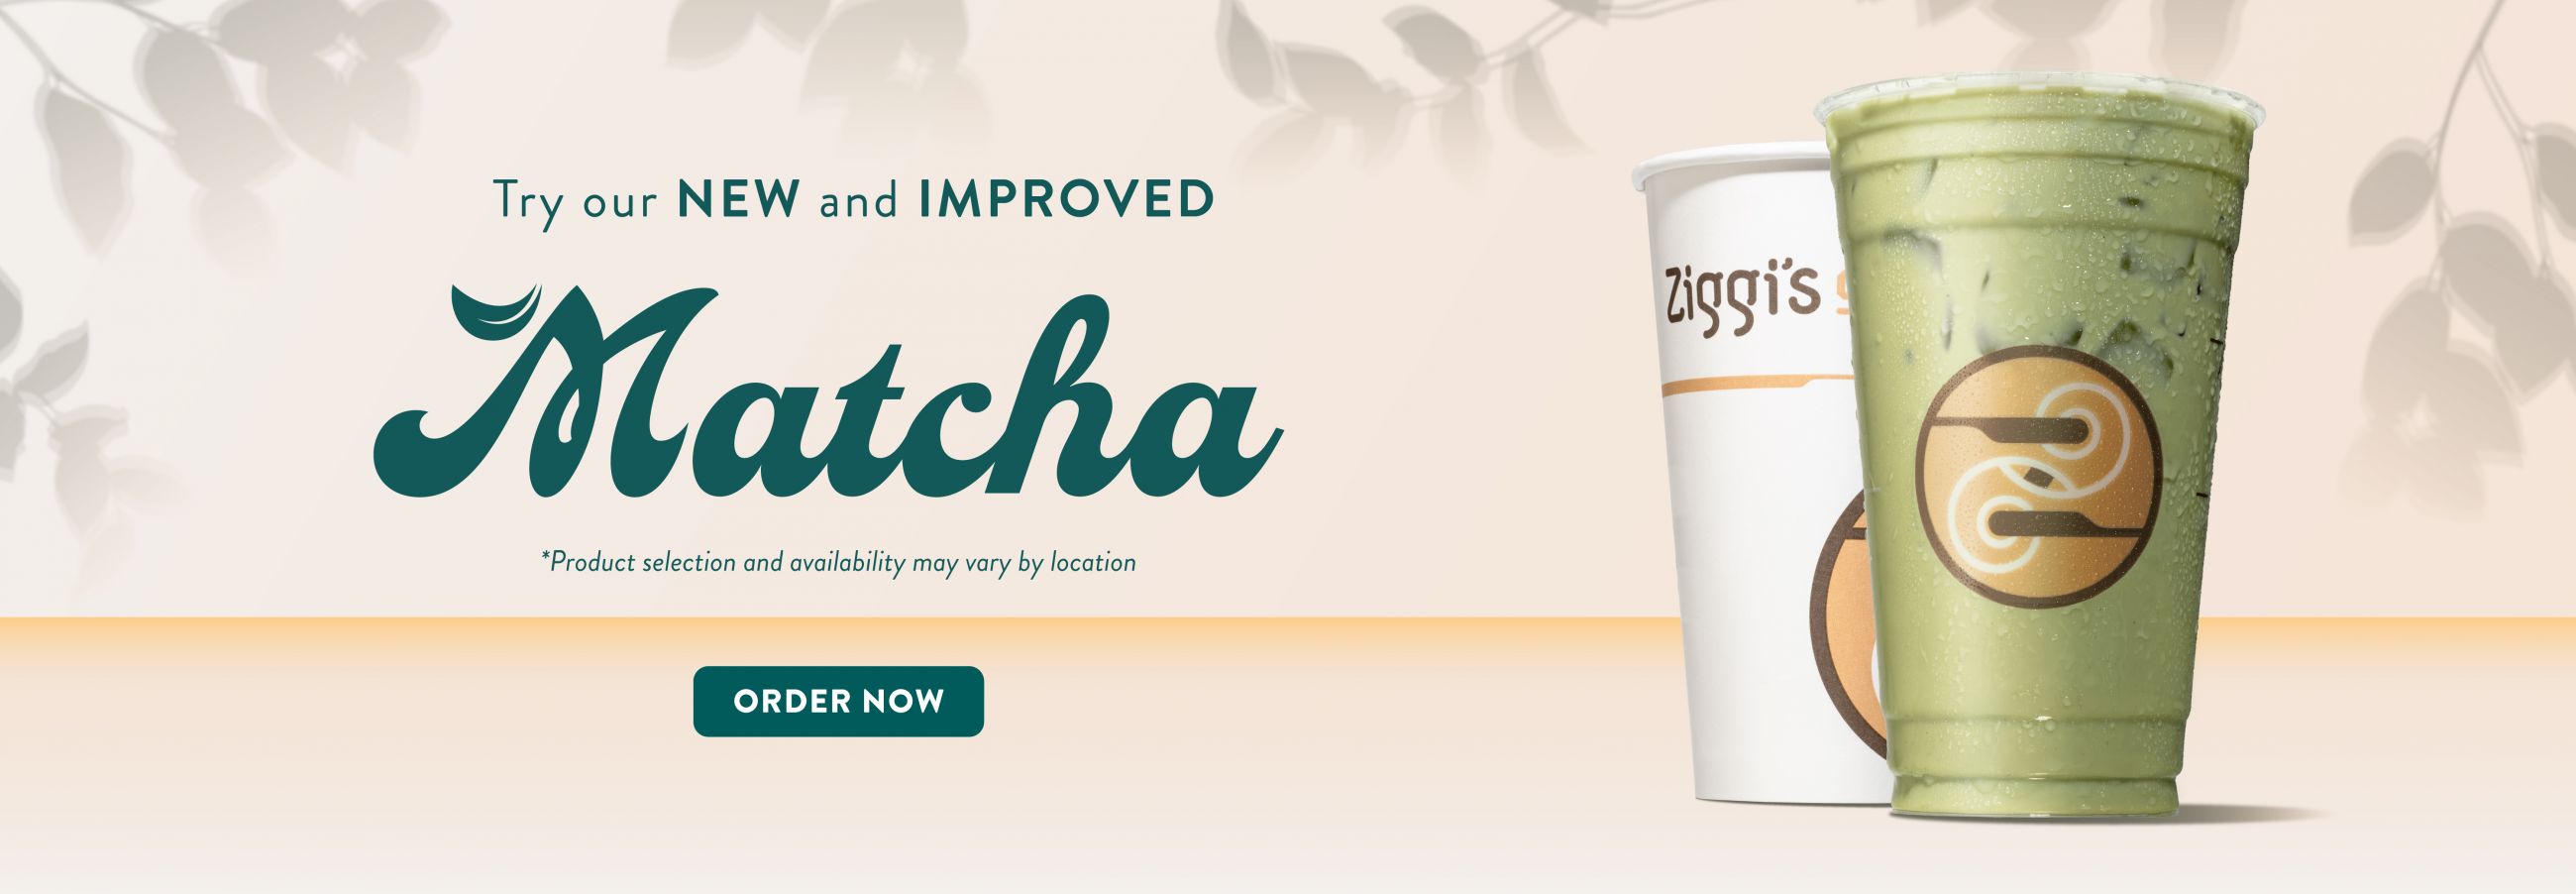 image showing the new and improved Matcha